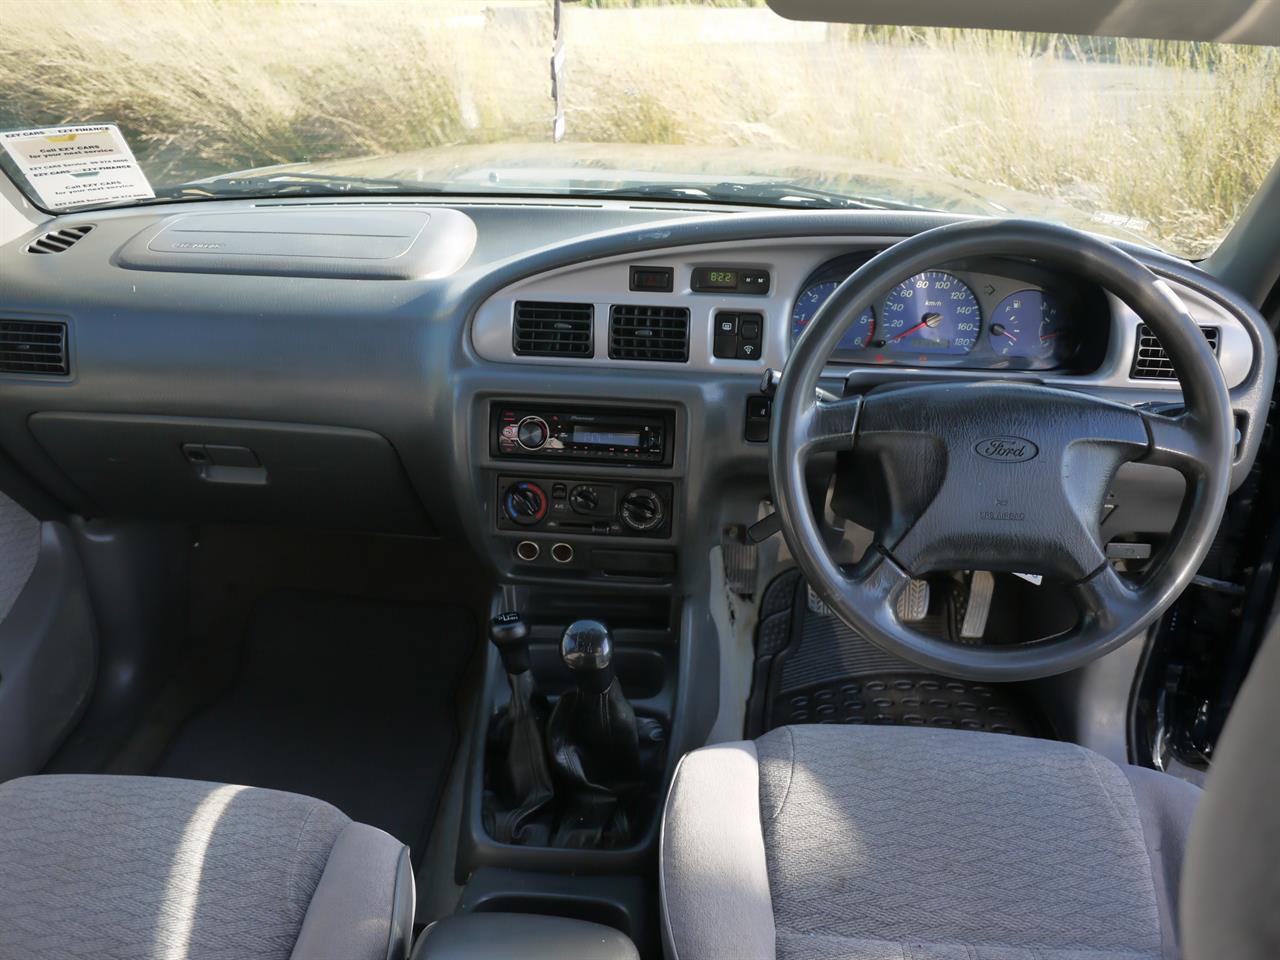 2004 Ford Courier XLX Crew Cab Utility image 14